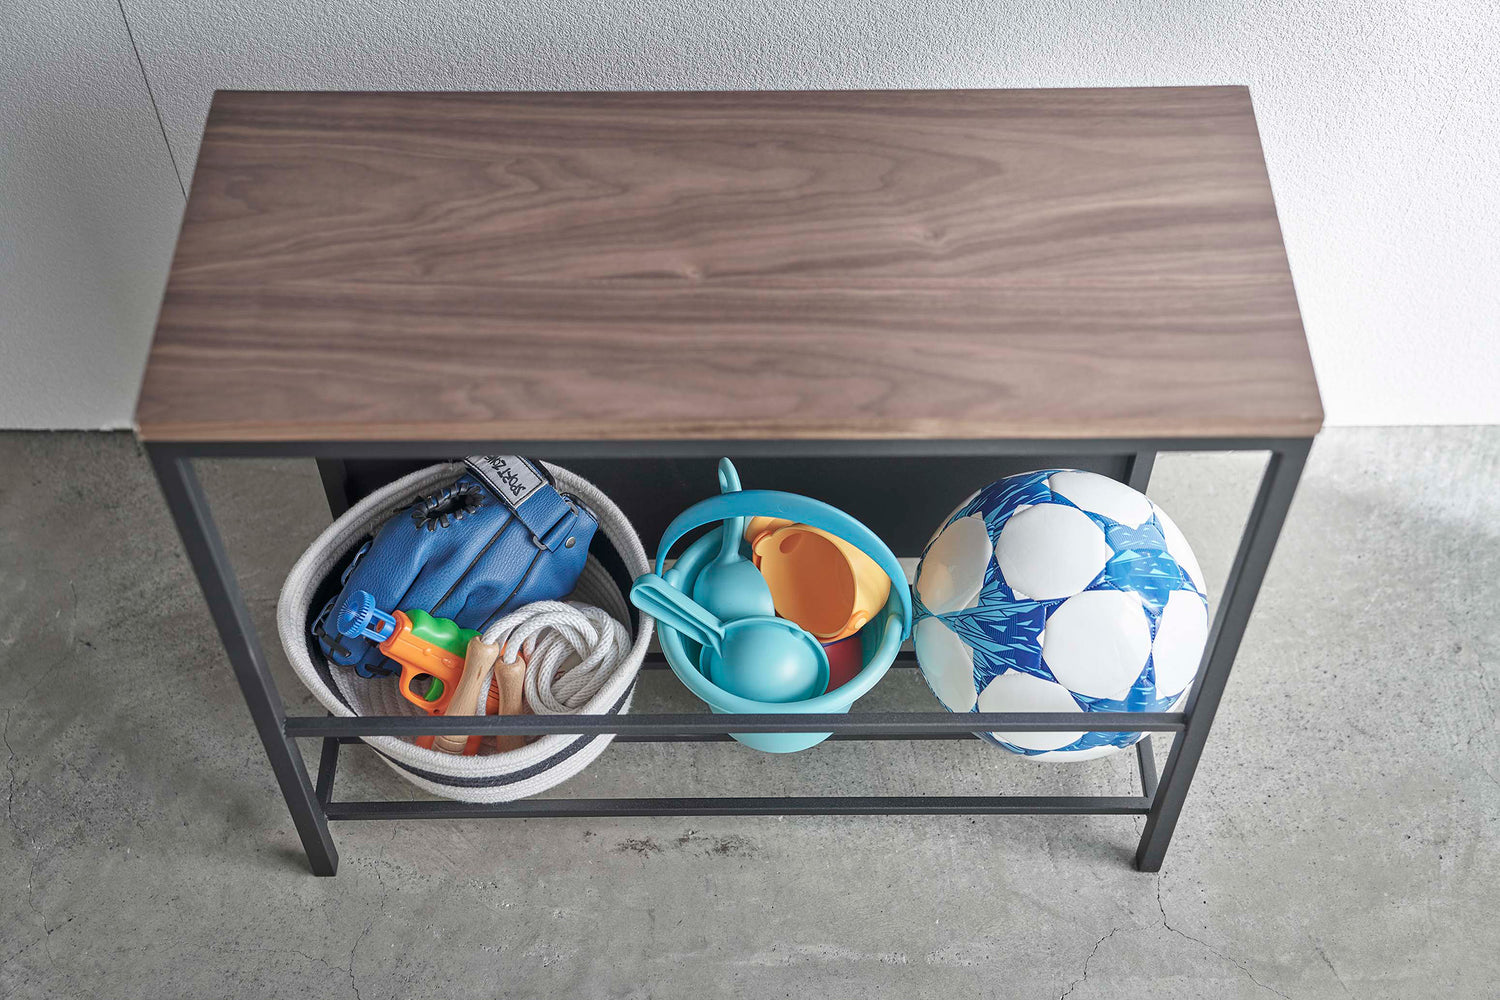 View 14 - Close up of black Yamazaki Discreet Entryway Storage Shelf with toys and balls inside